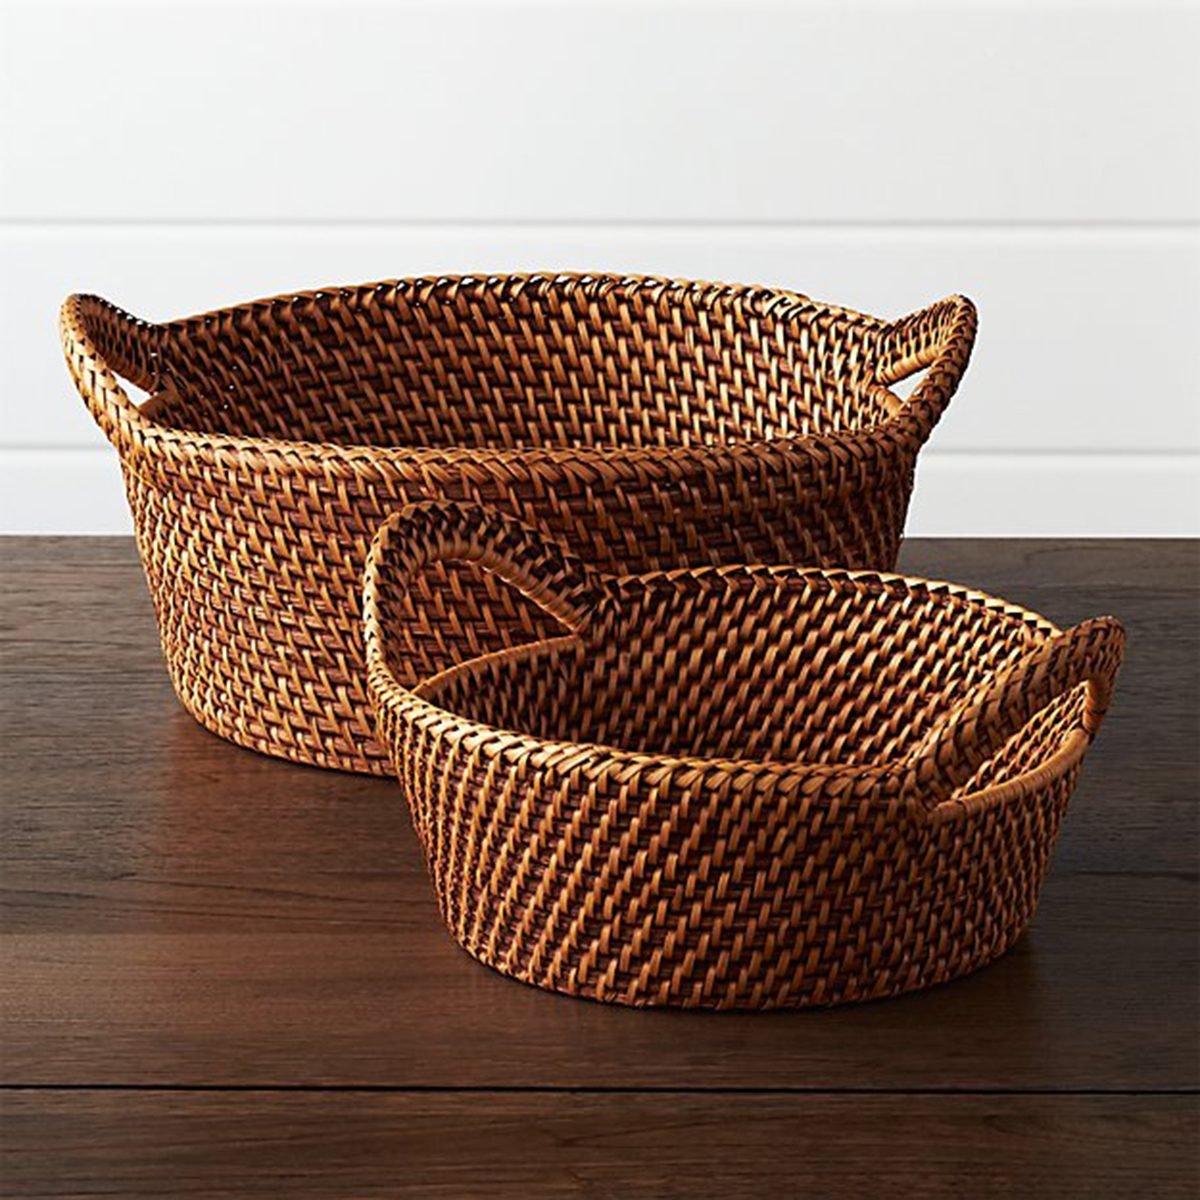 10 Cute Bread Baskets for Your Table | Taste of Home